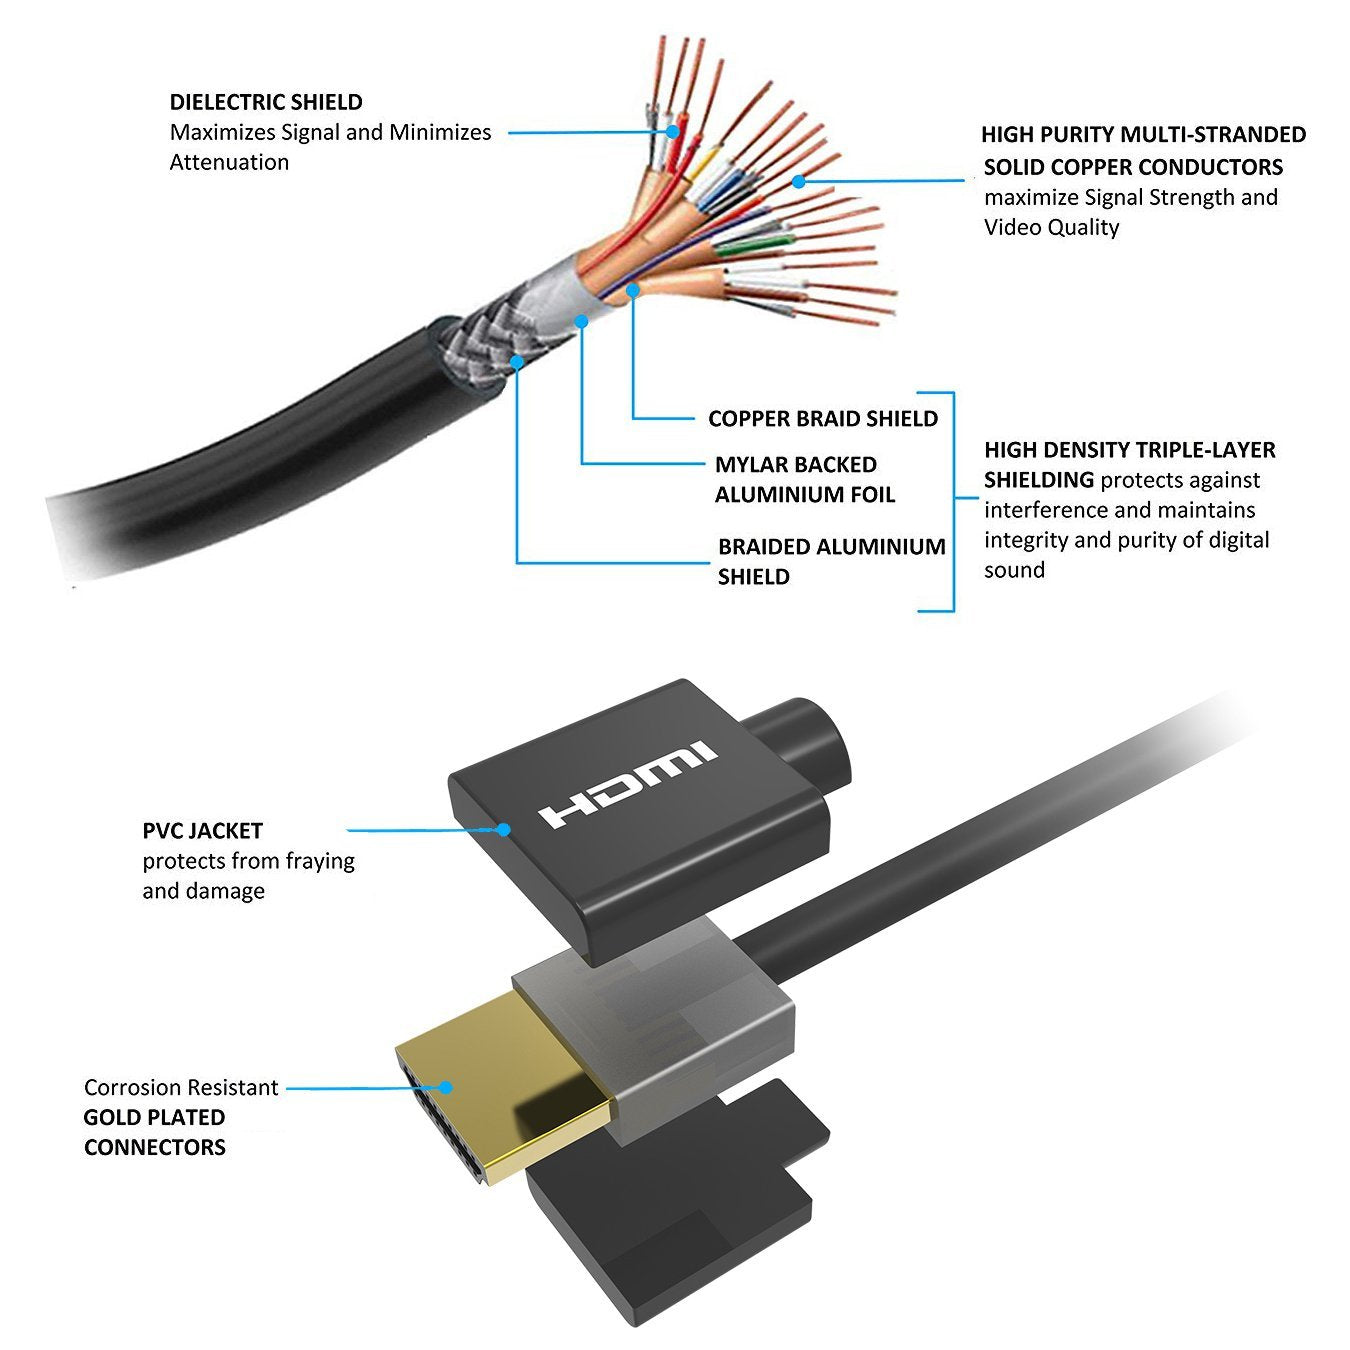 HDMI2-US - New Ultra Slim, High Speed with Ethernet HDMI Cable